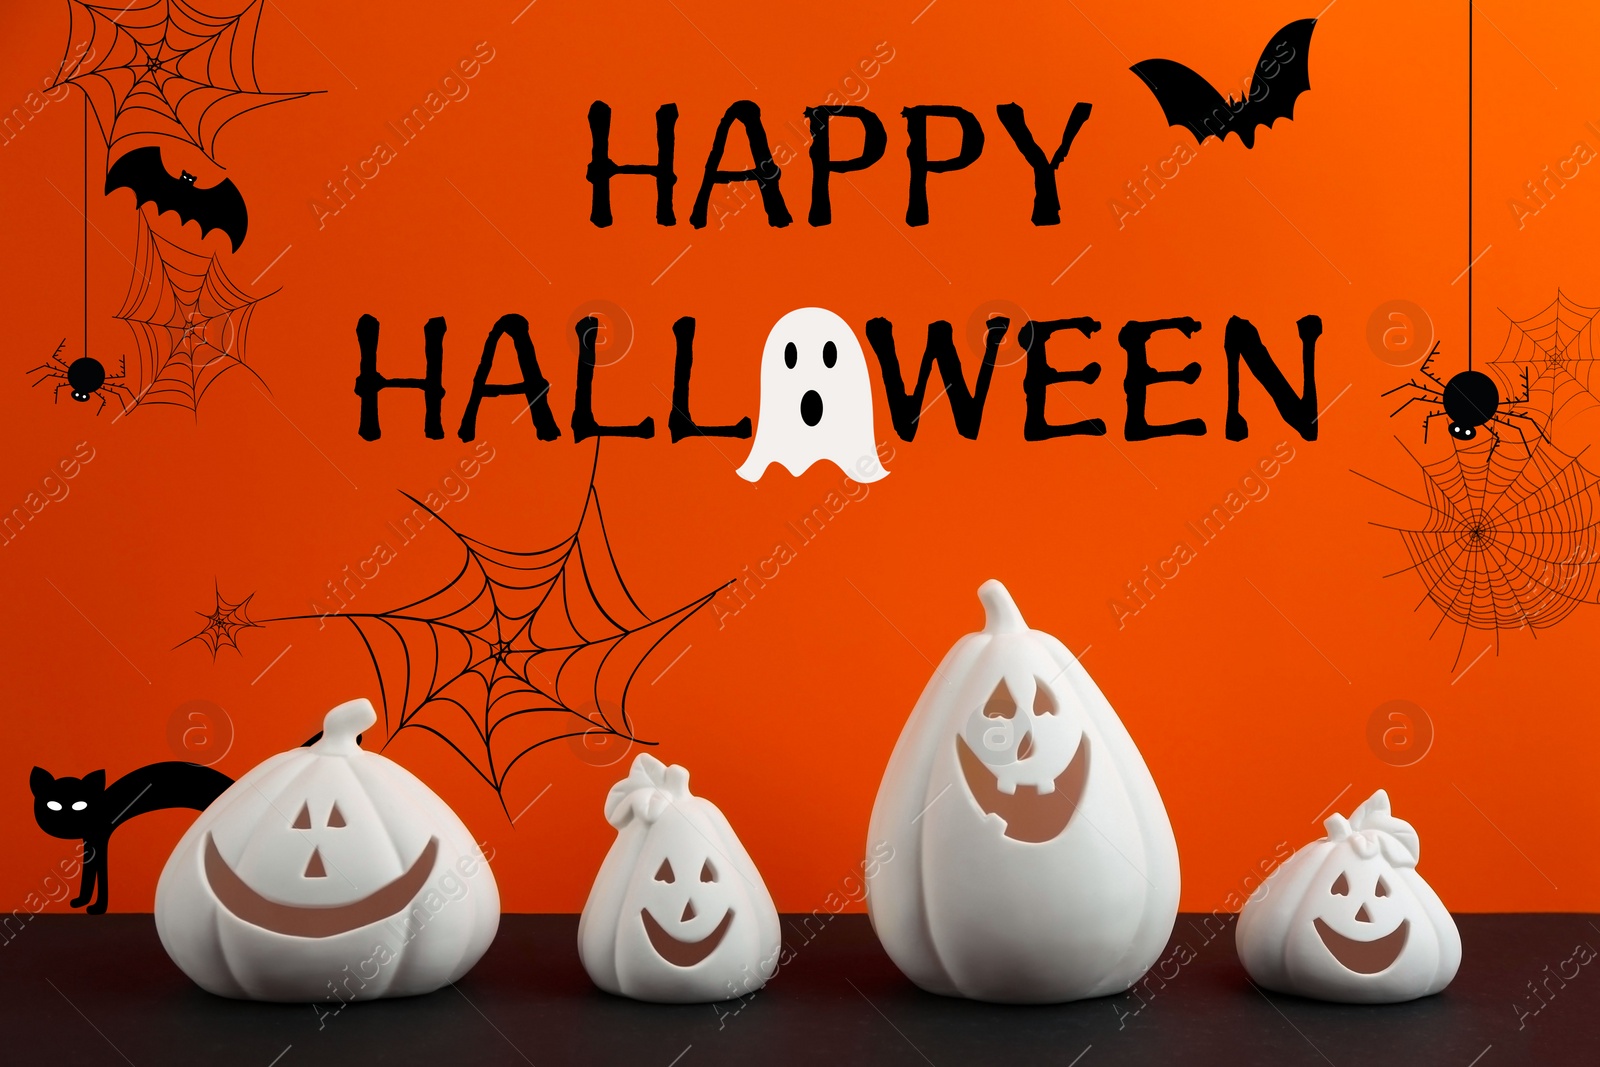 Image of Happy Halloween greeting card design. White pumpkin shaped candle holders on black table against orange background with illustrations